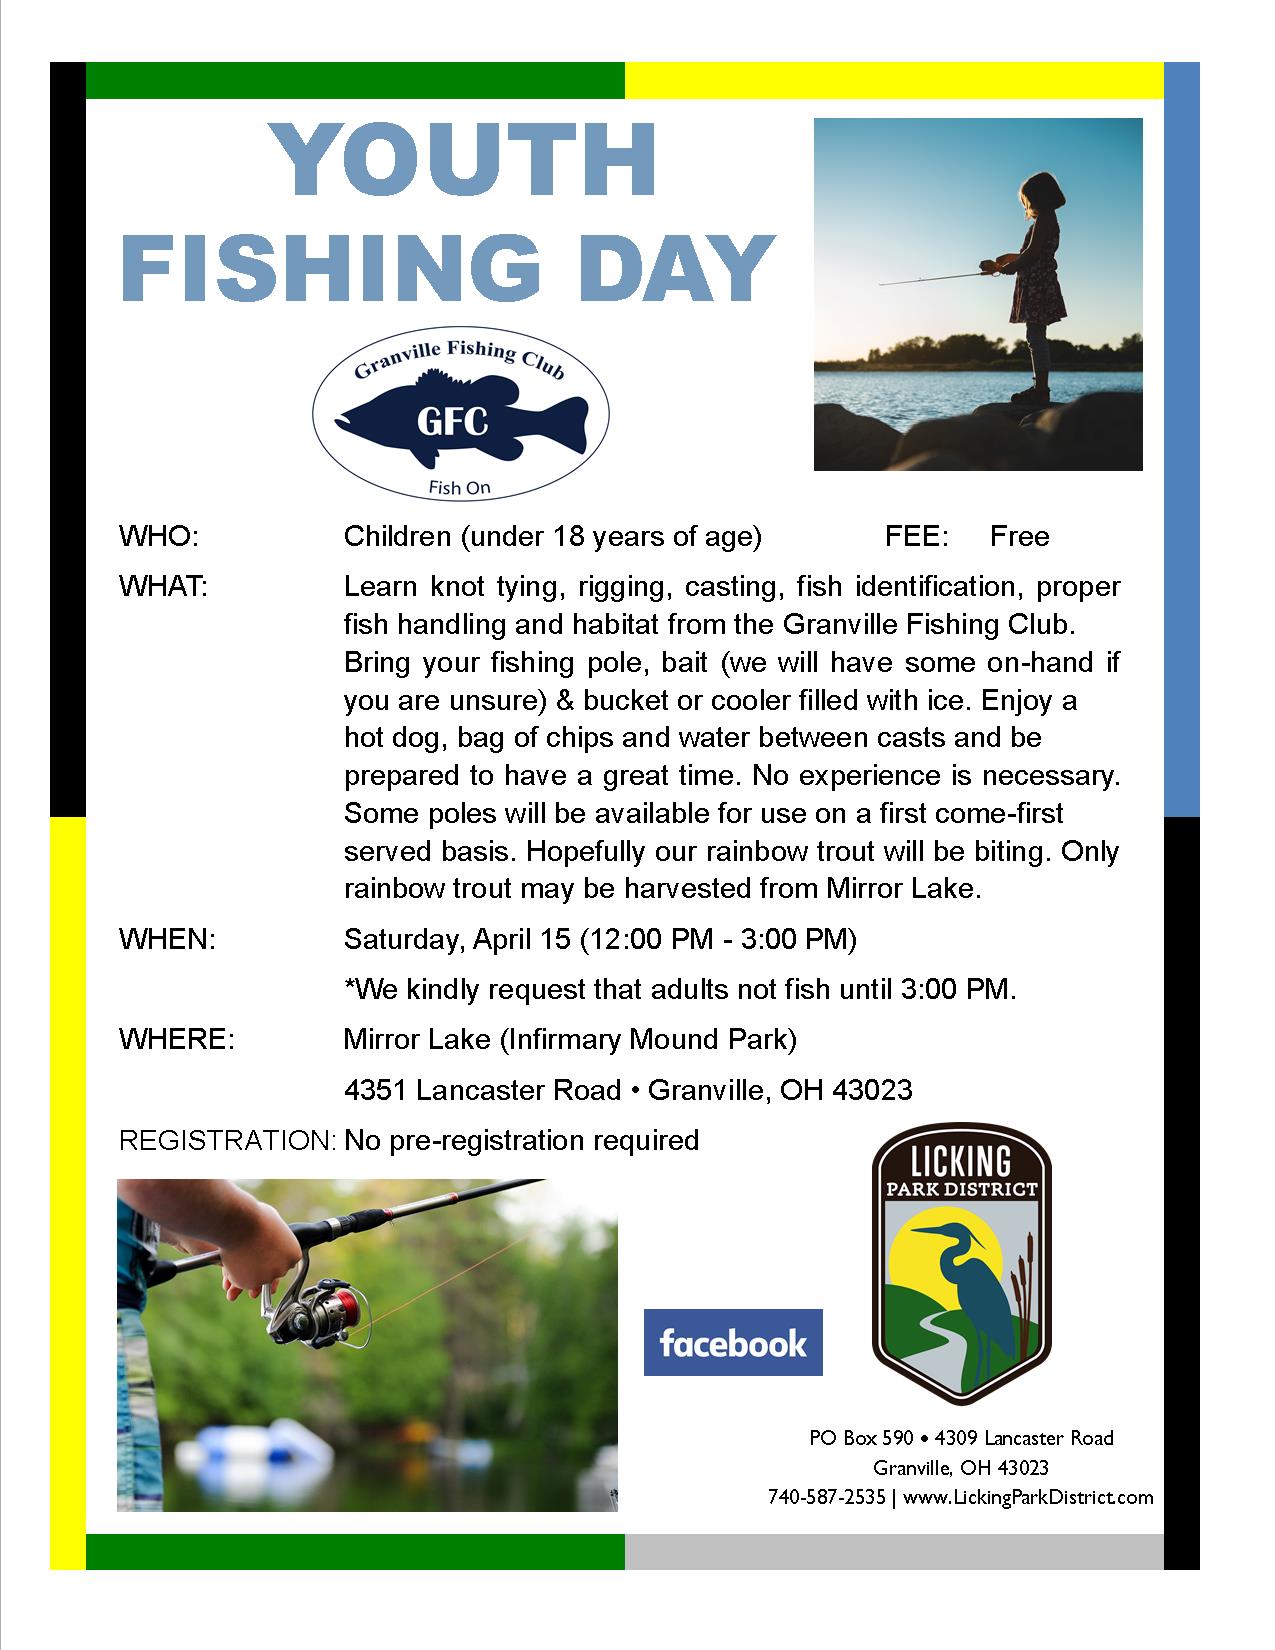 Youth Fishing Day Event at Infirmary Mound Park! Licking Park District